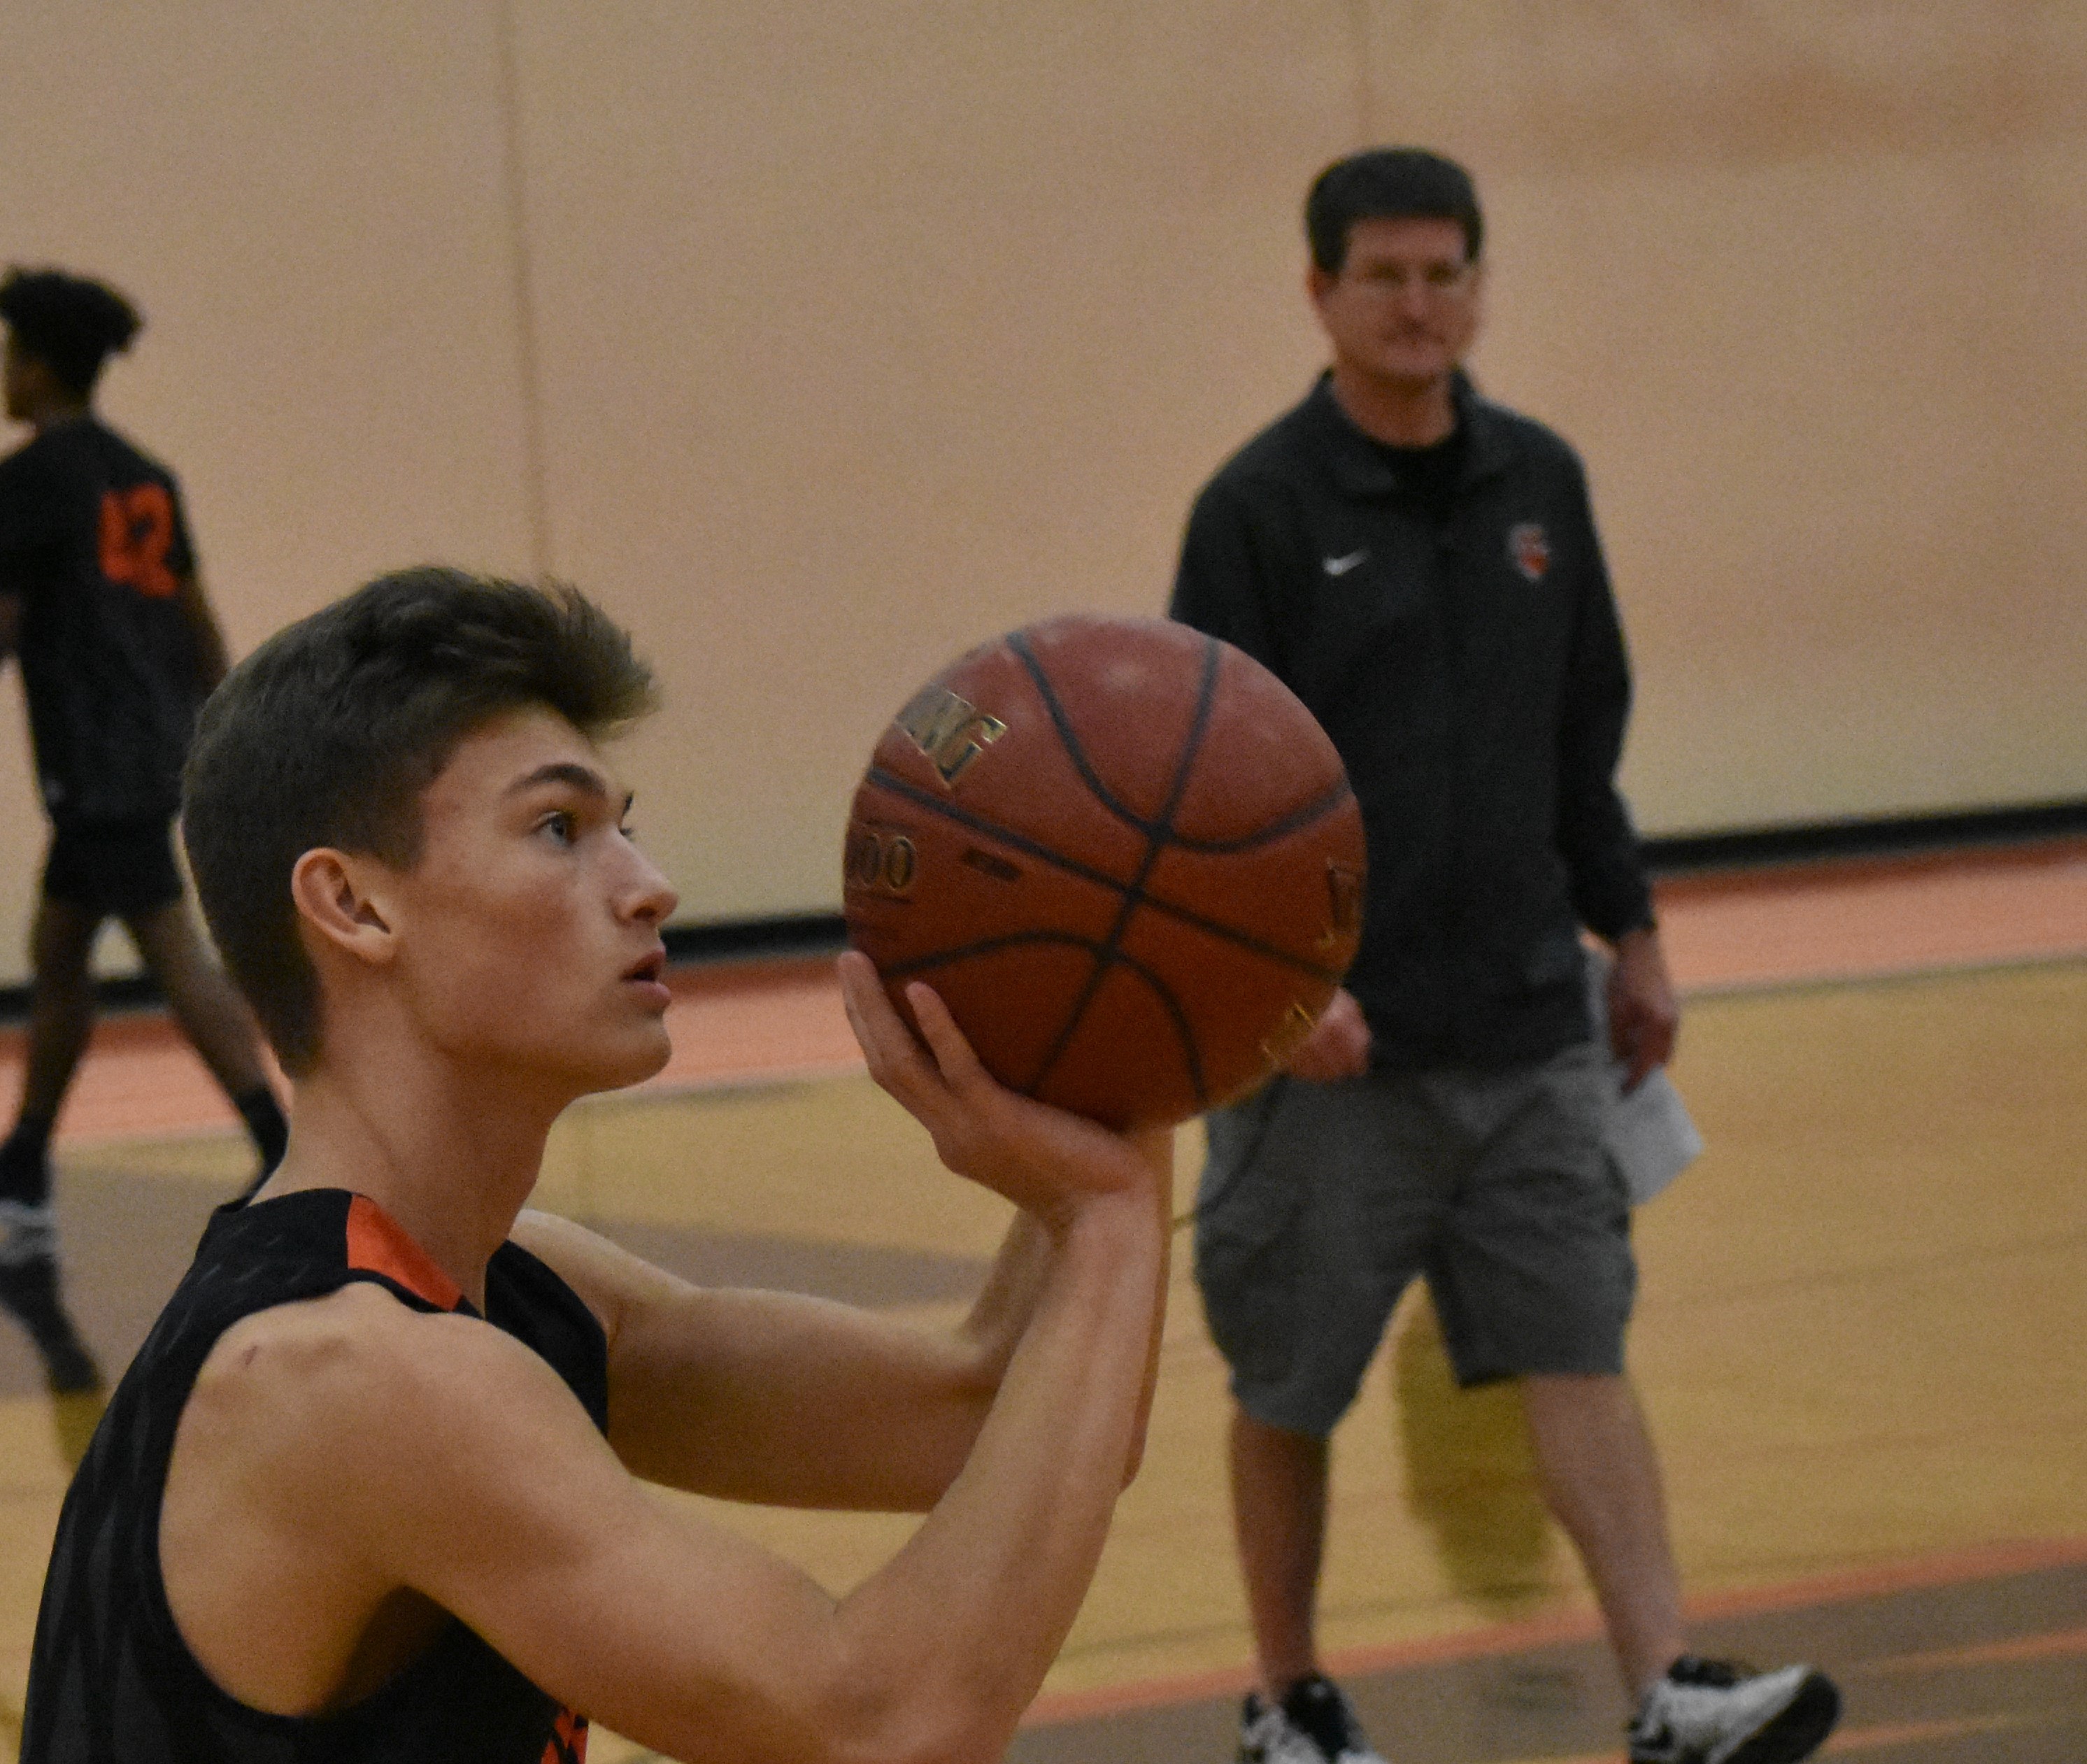 Looking to make waves in the Bay: West De Pere boys’ basketball preview